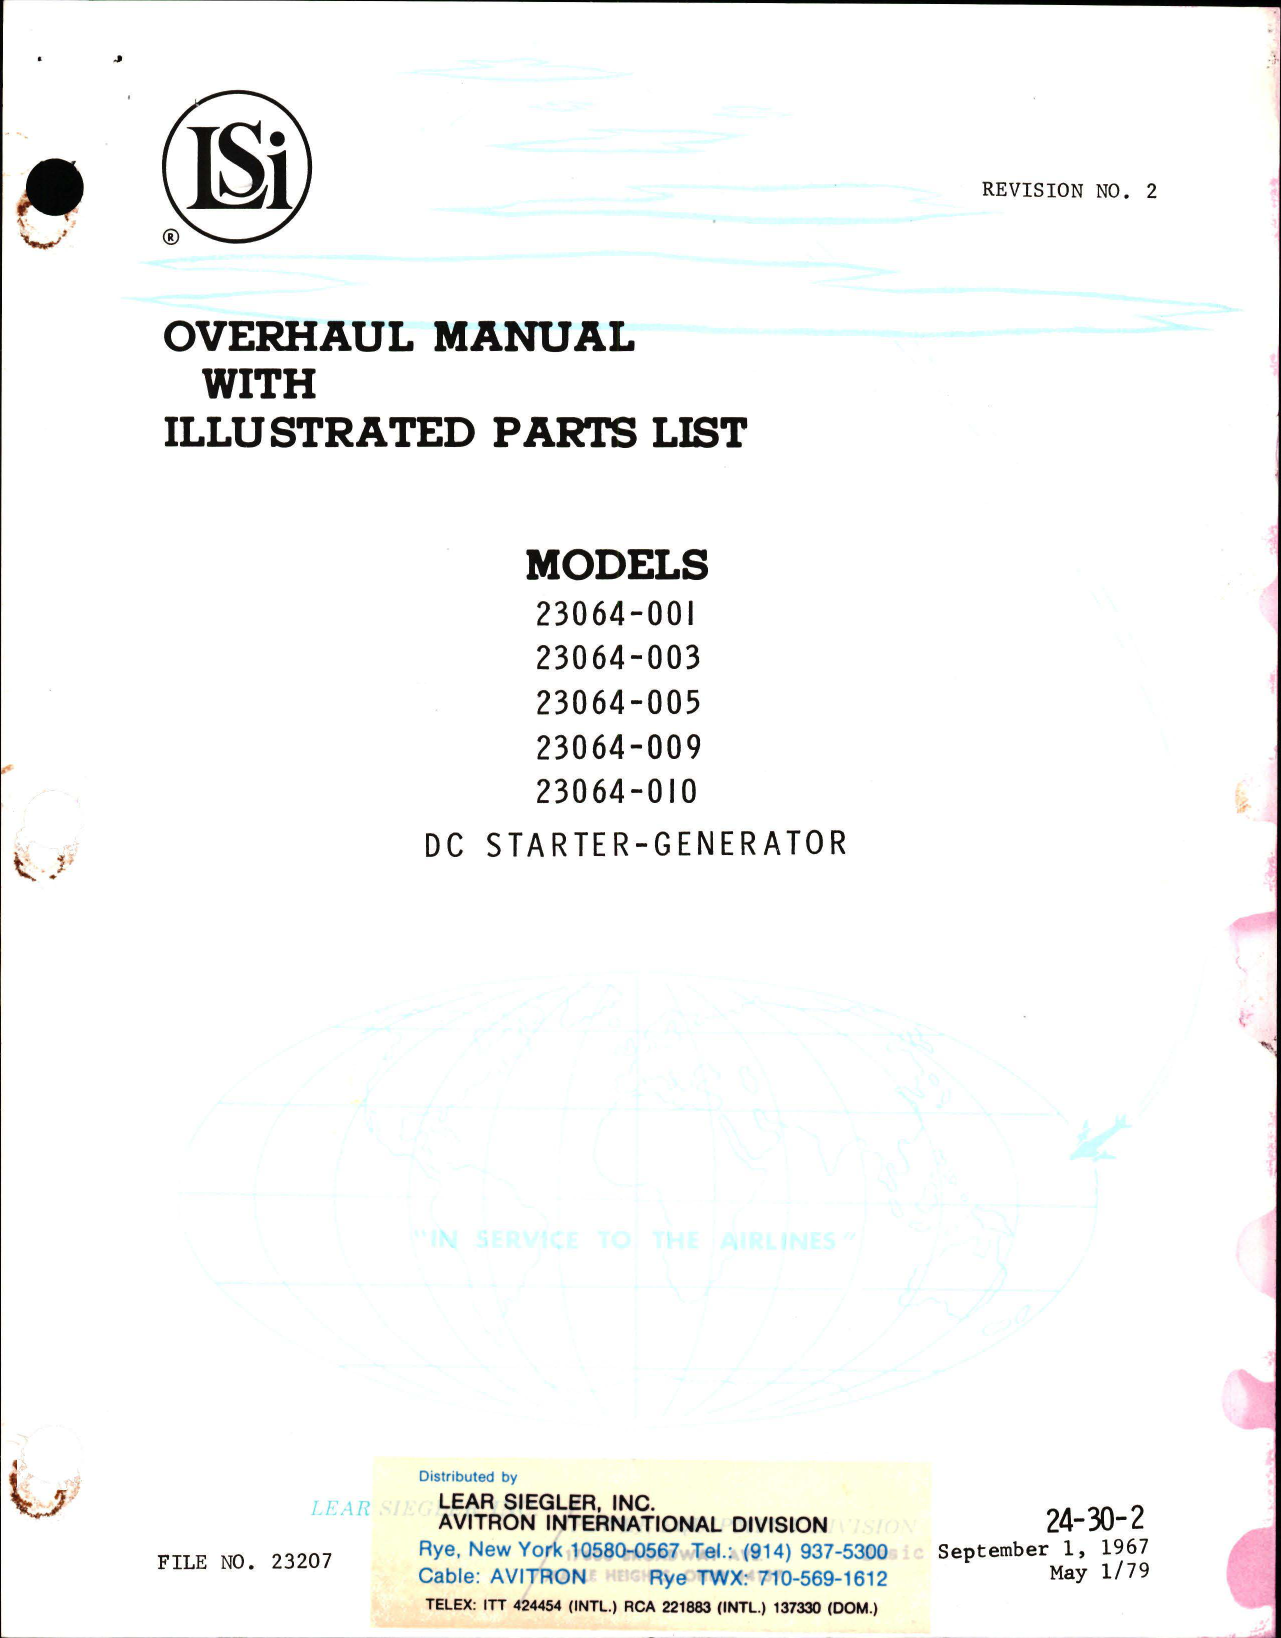 Sample page 1 from AirCorps Library document: Overhaul Manual with Illustrated Parts List for DC Starter Generator